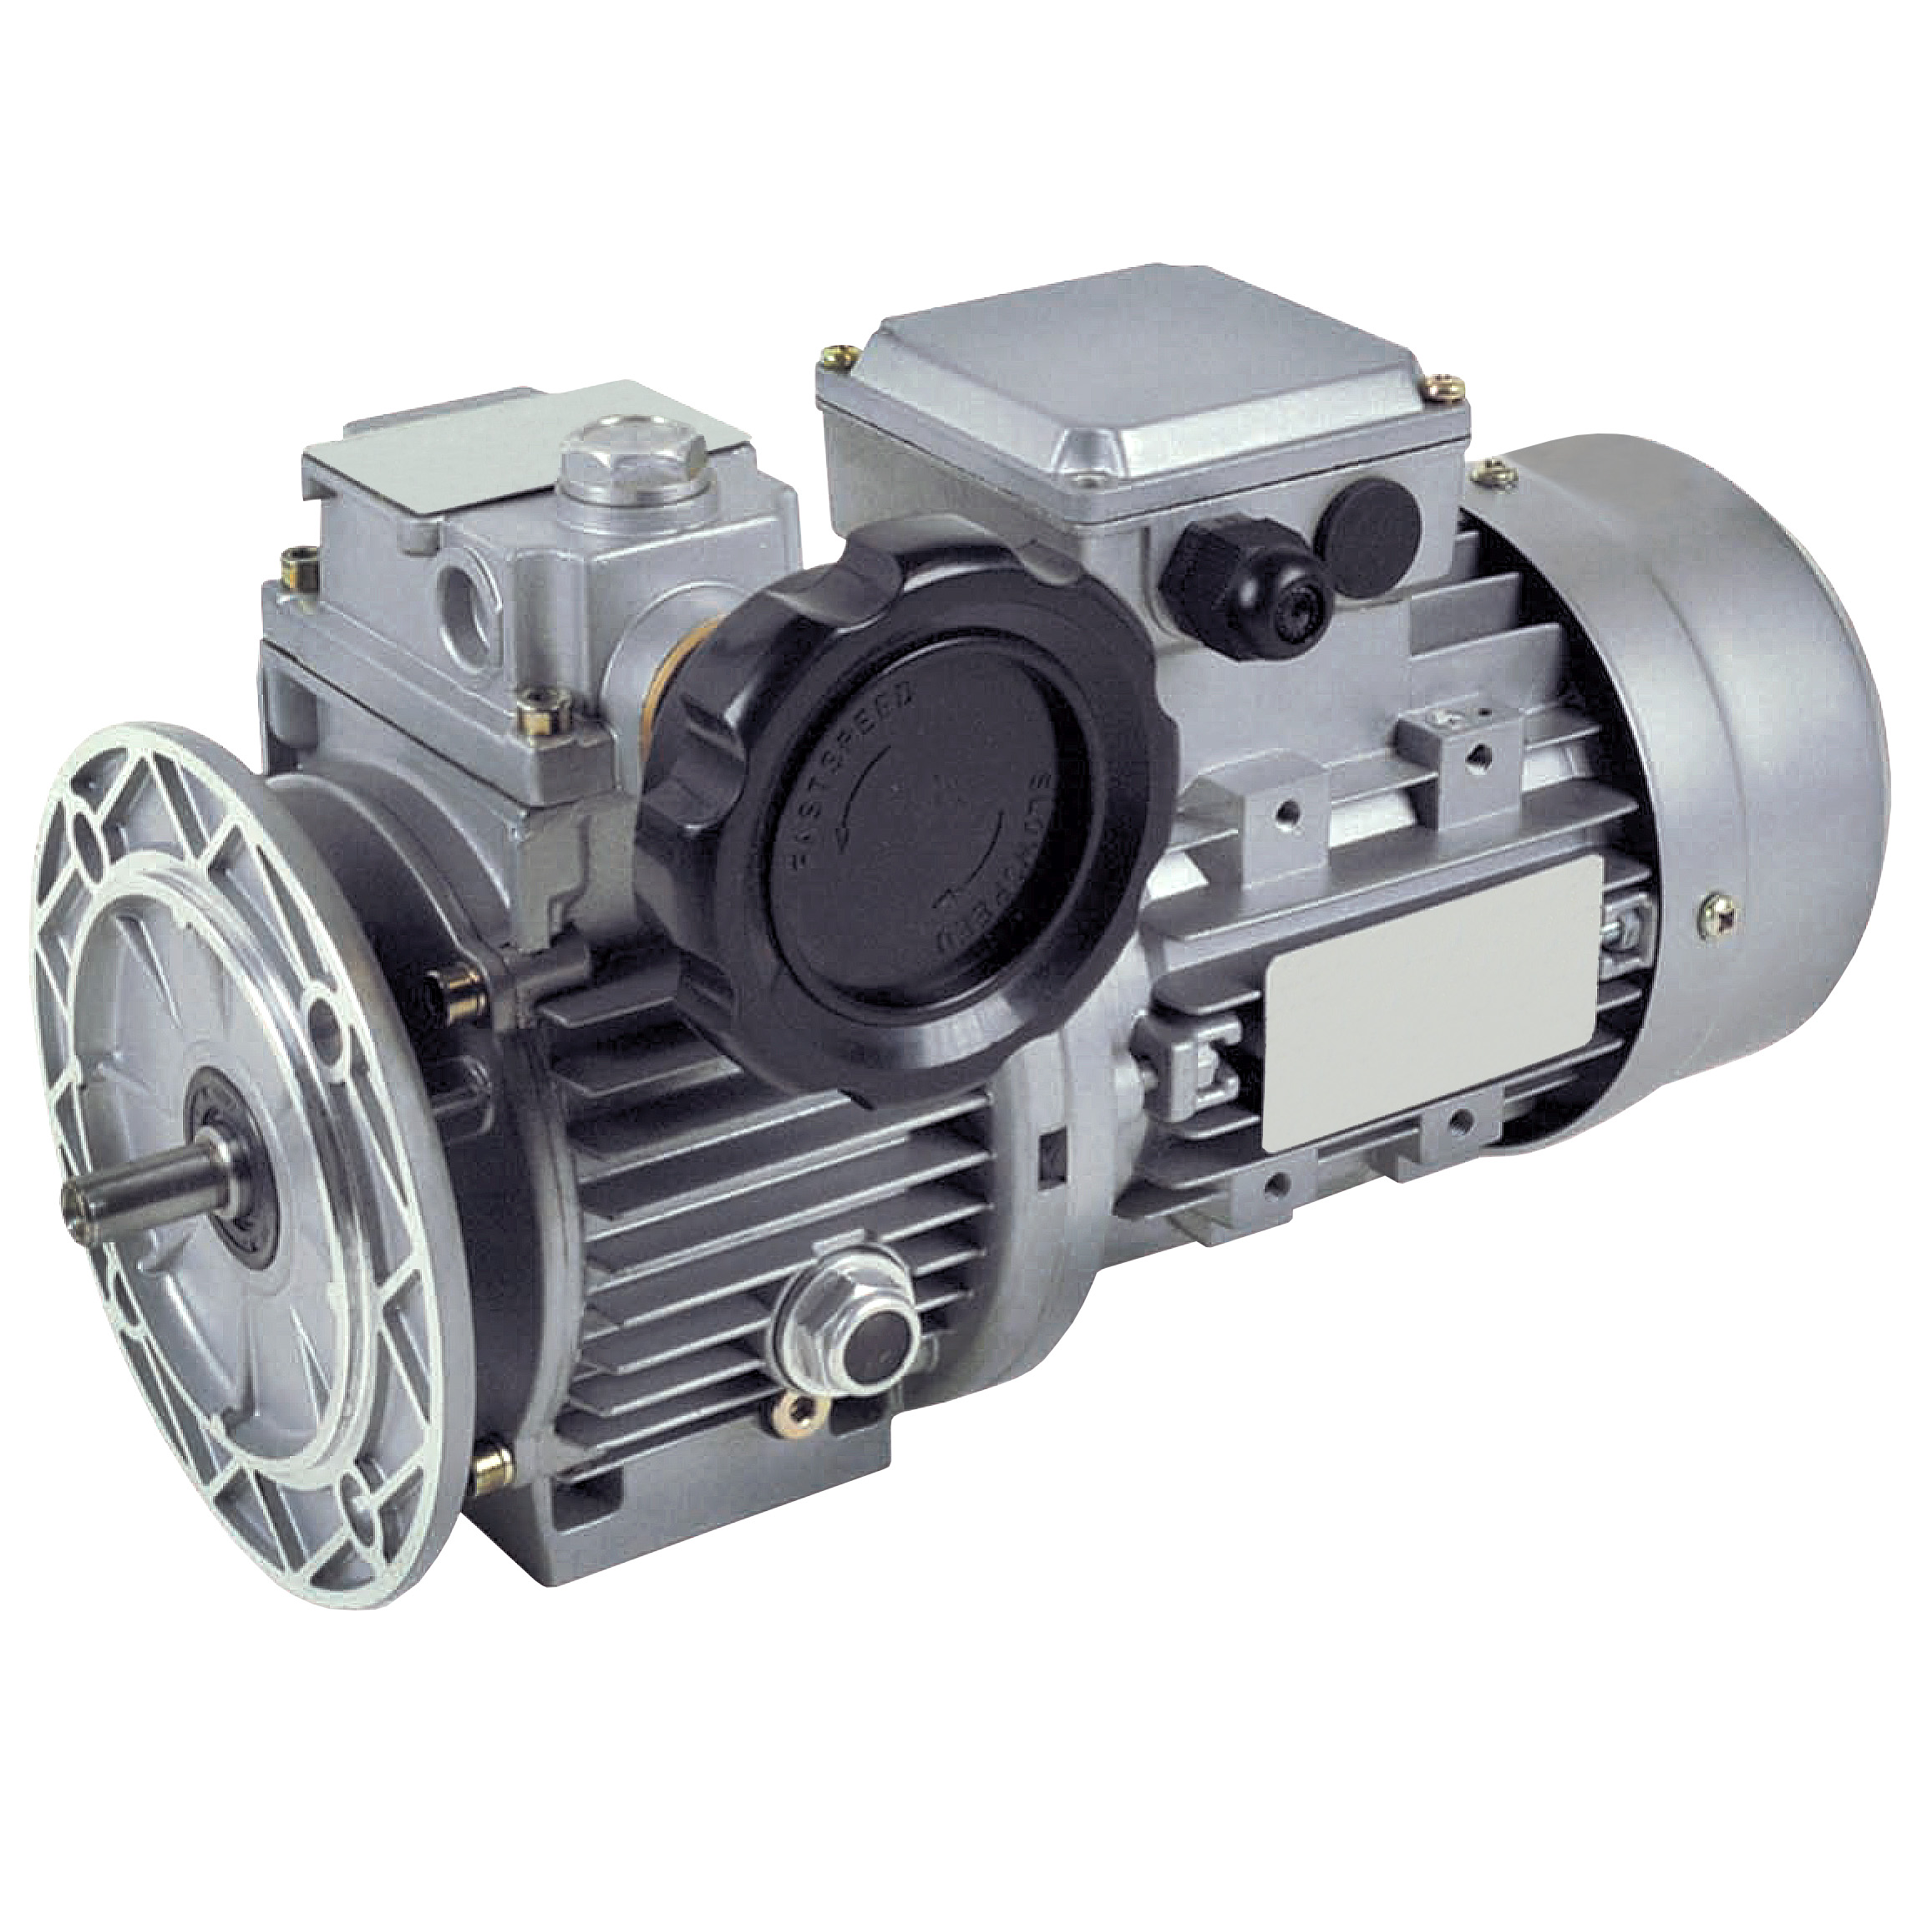 Mechanical speed variator - from 0,18 to 1,5kW - 4 pole motor, 1,400 RPM 230/400V - 1:5